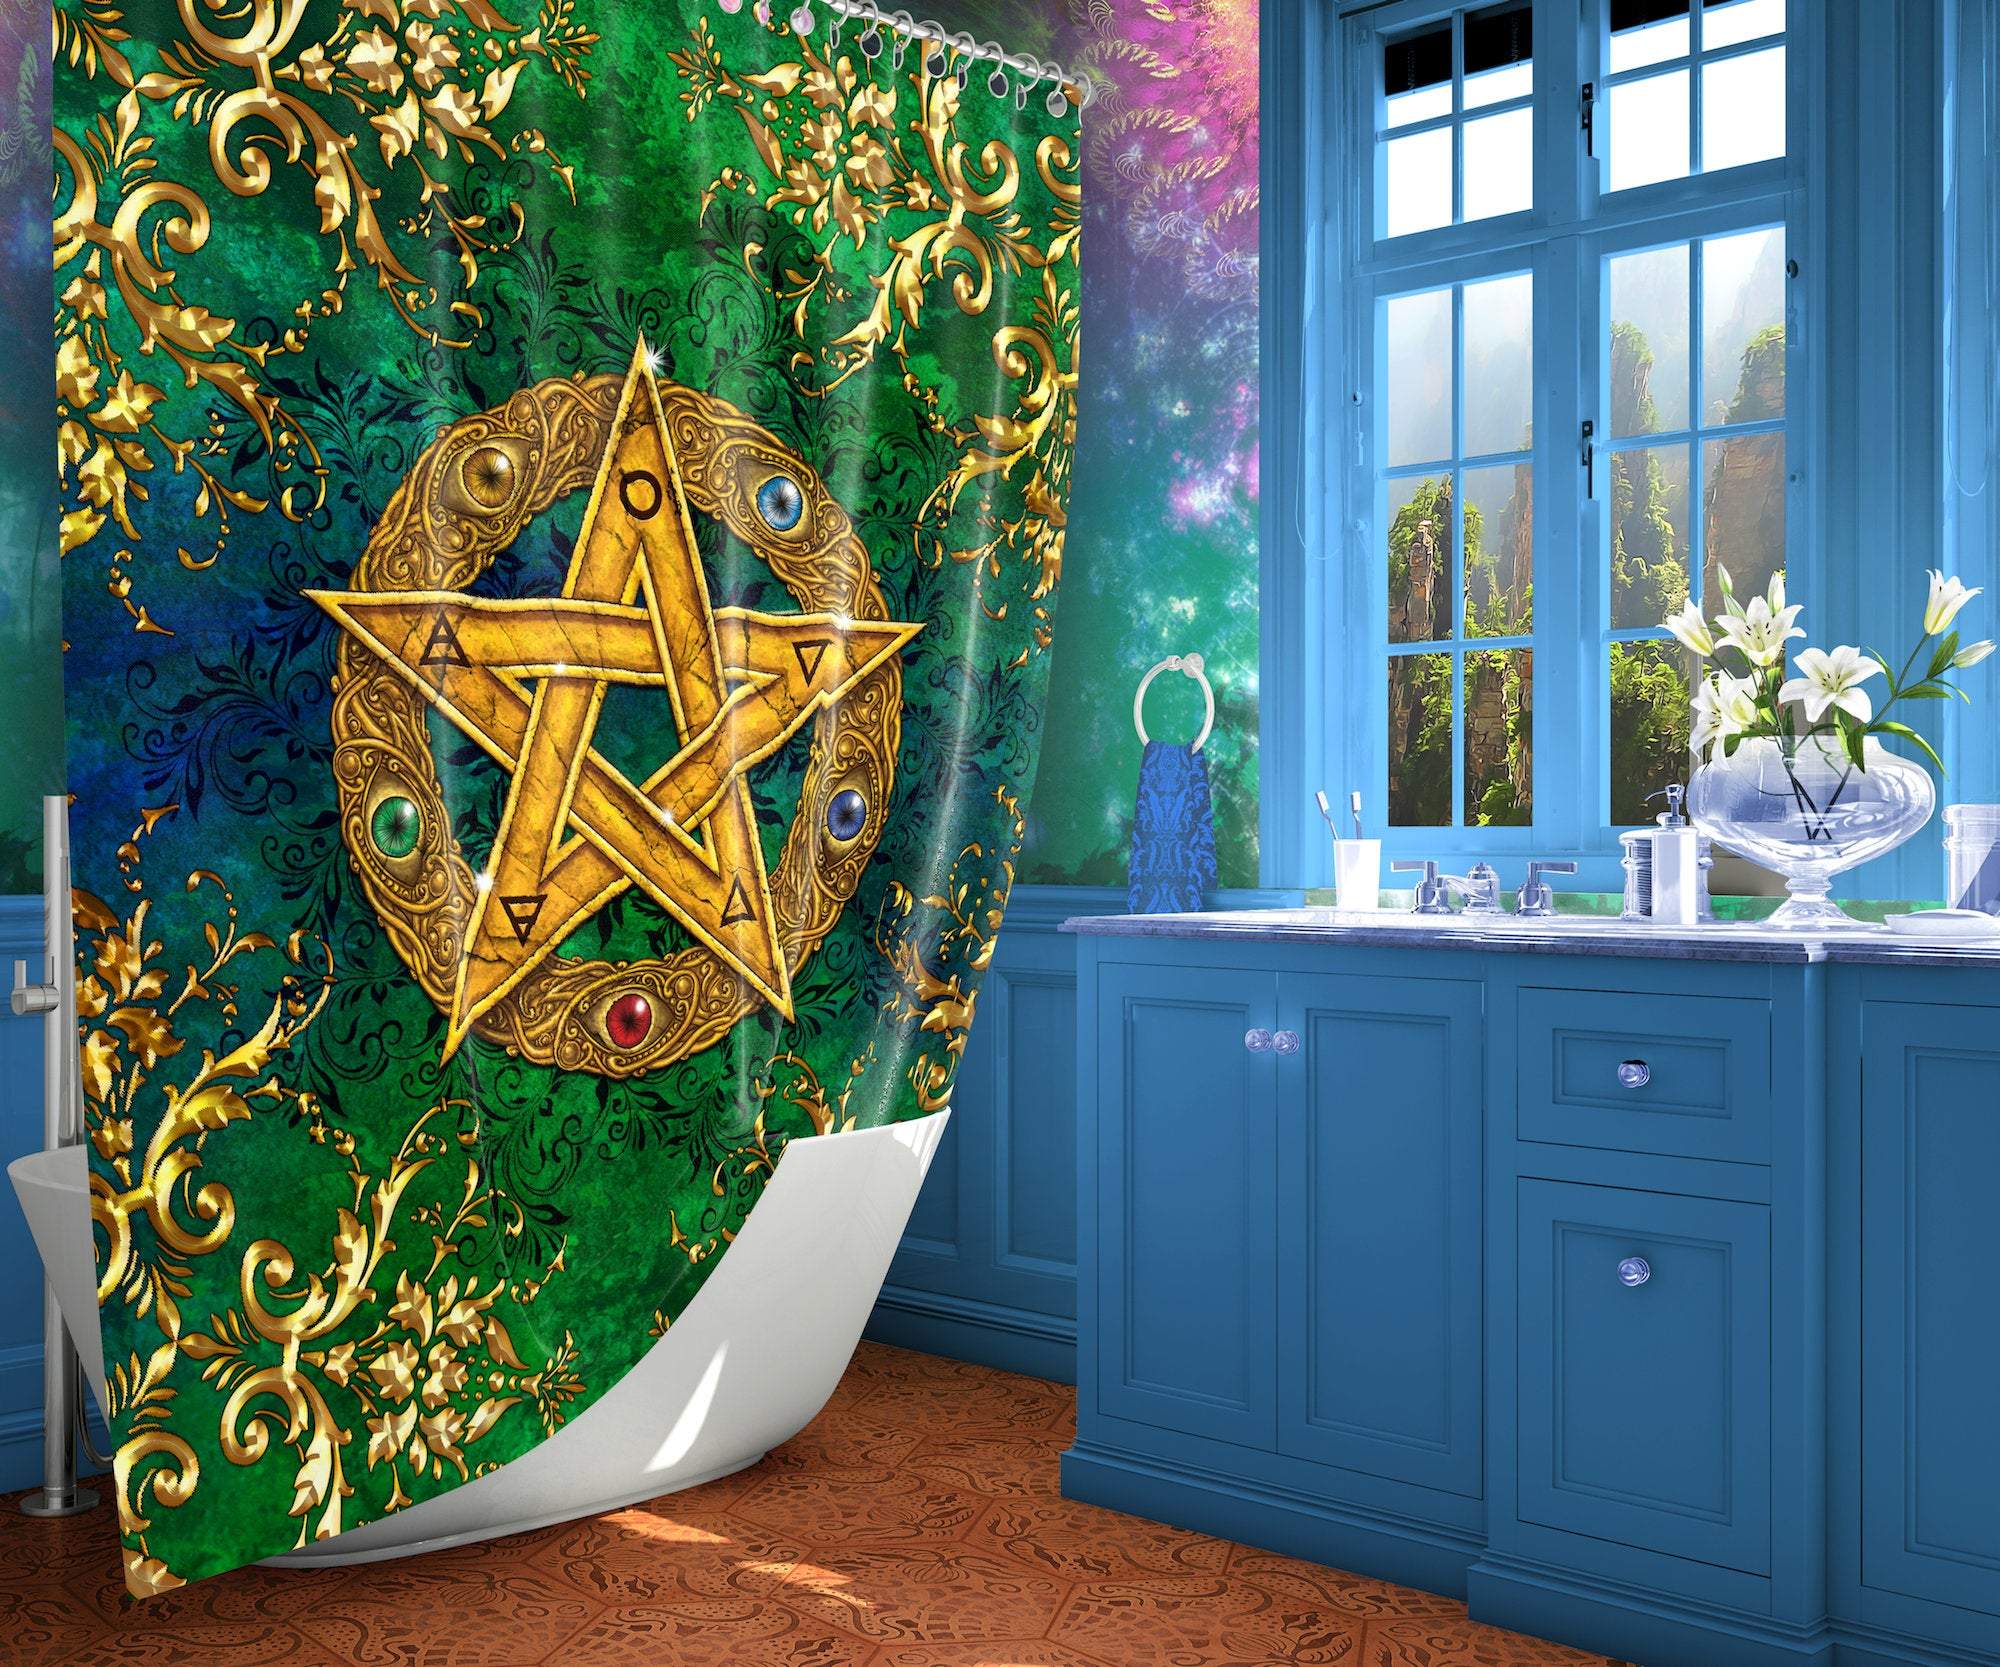 Wicca Shower Curtain, Witchy Bathroom Decor, Pagan Art, Eclectic and Funky Home - Gold Pentacle - Abysm Internal